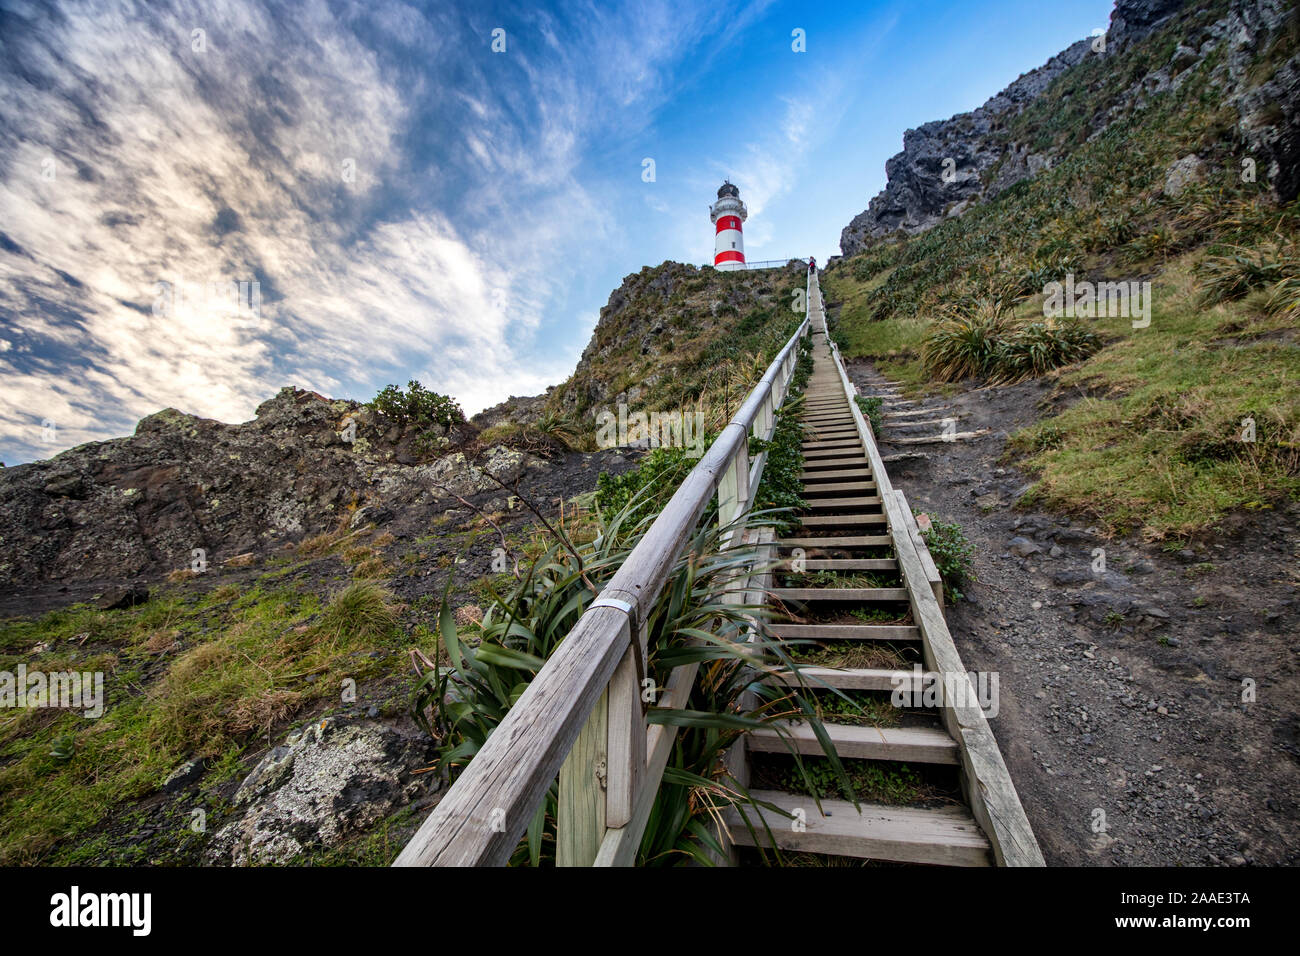 View on Cape Palliser red and white striped lighthouse with steep wooden stairs leading to it. Lighthouse sits on rocky ridge with lush vegetation. Stock Photo